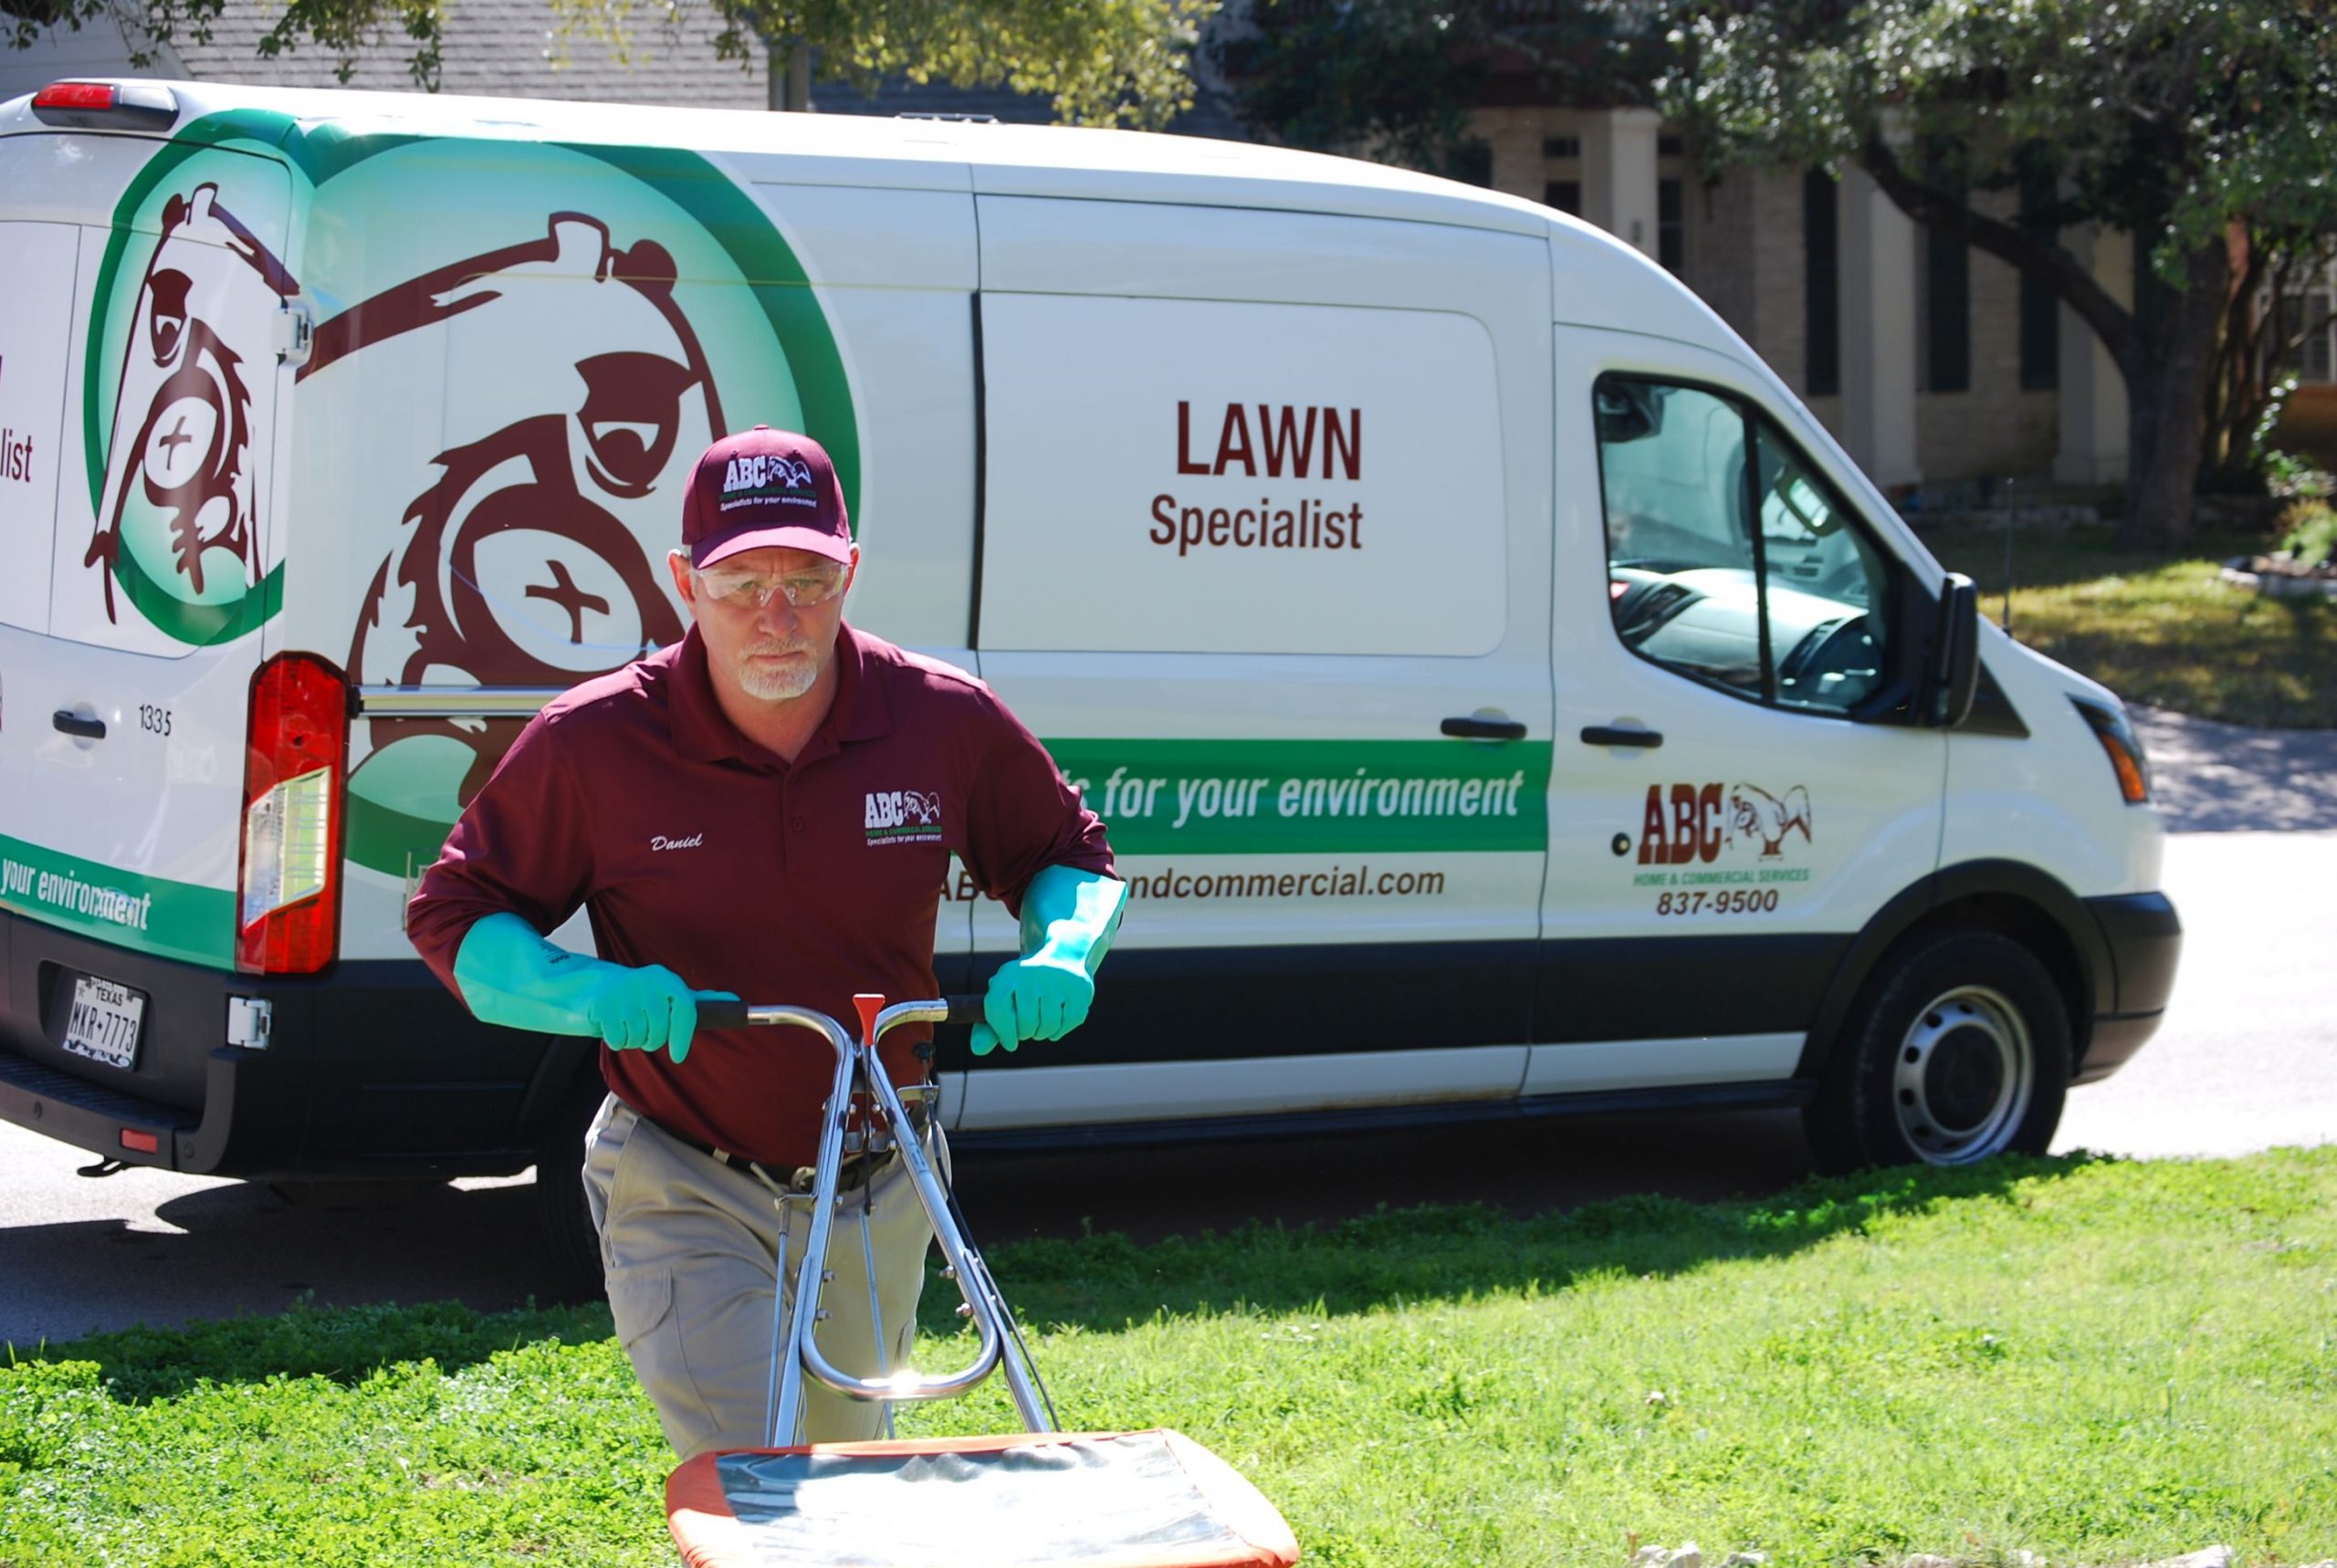 ABC lawn mowing, fertilization and tree services for Belton, TX.